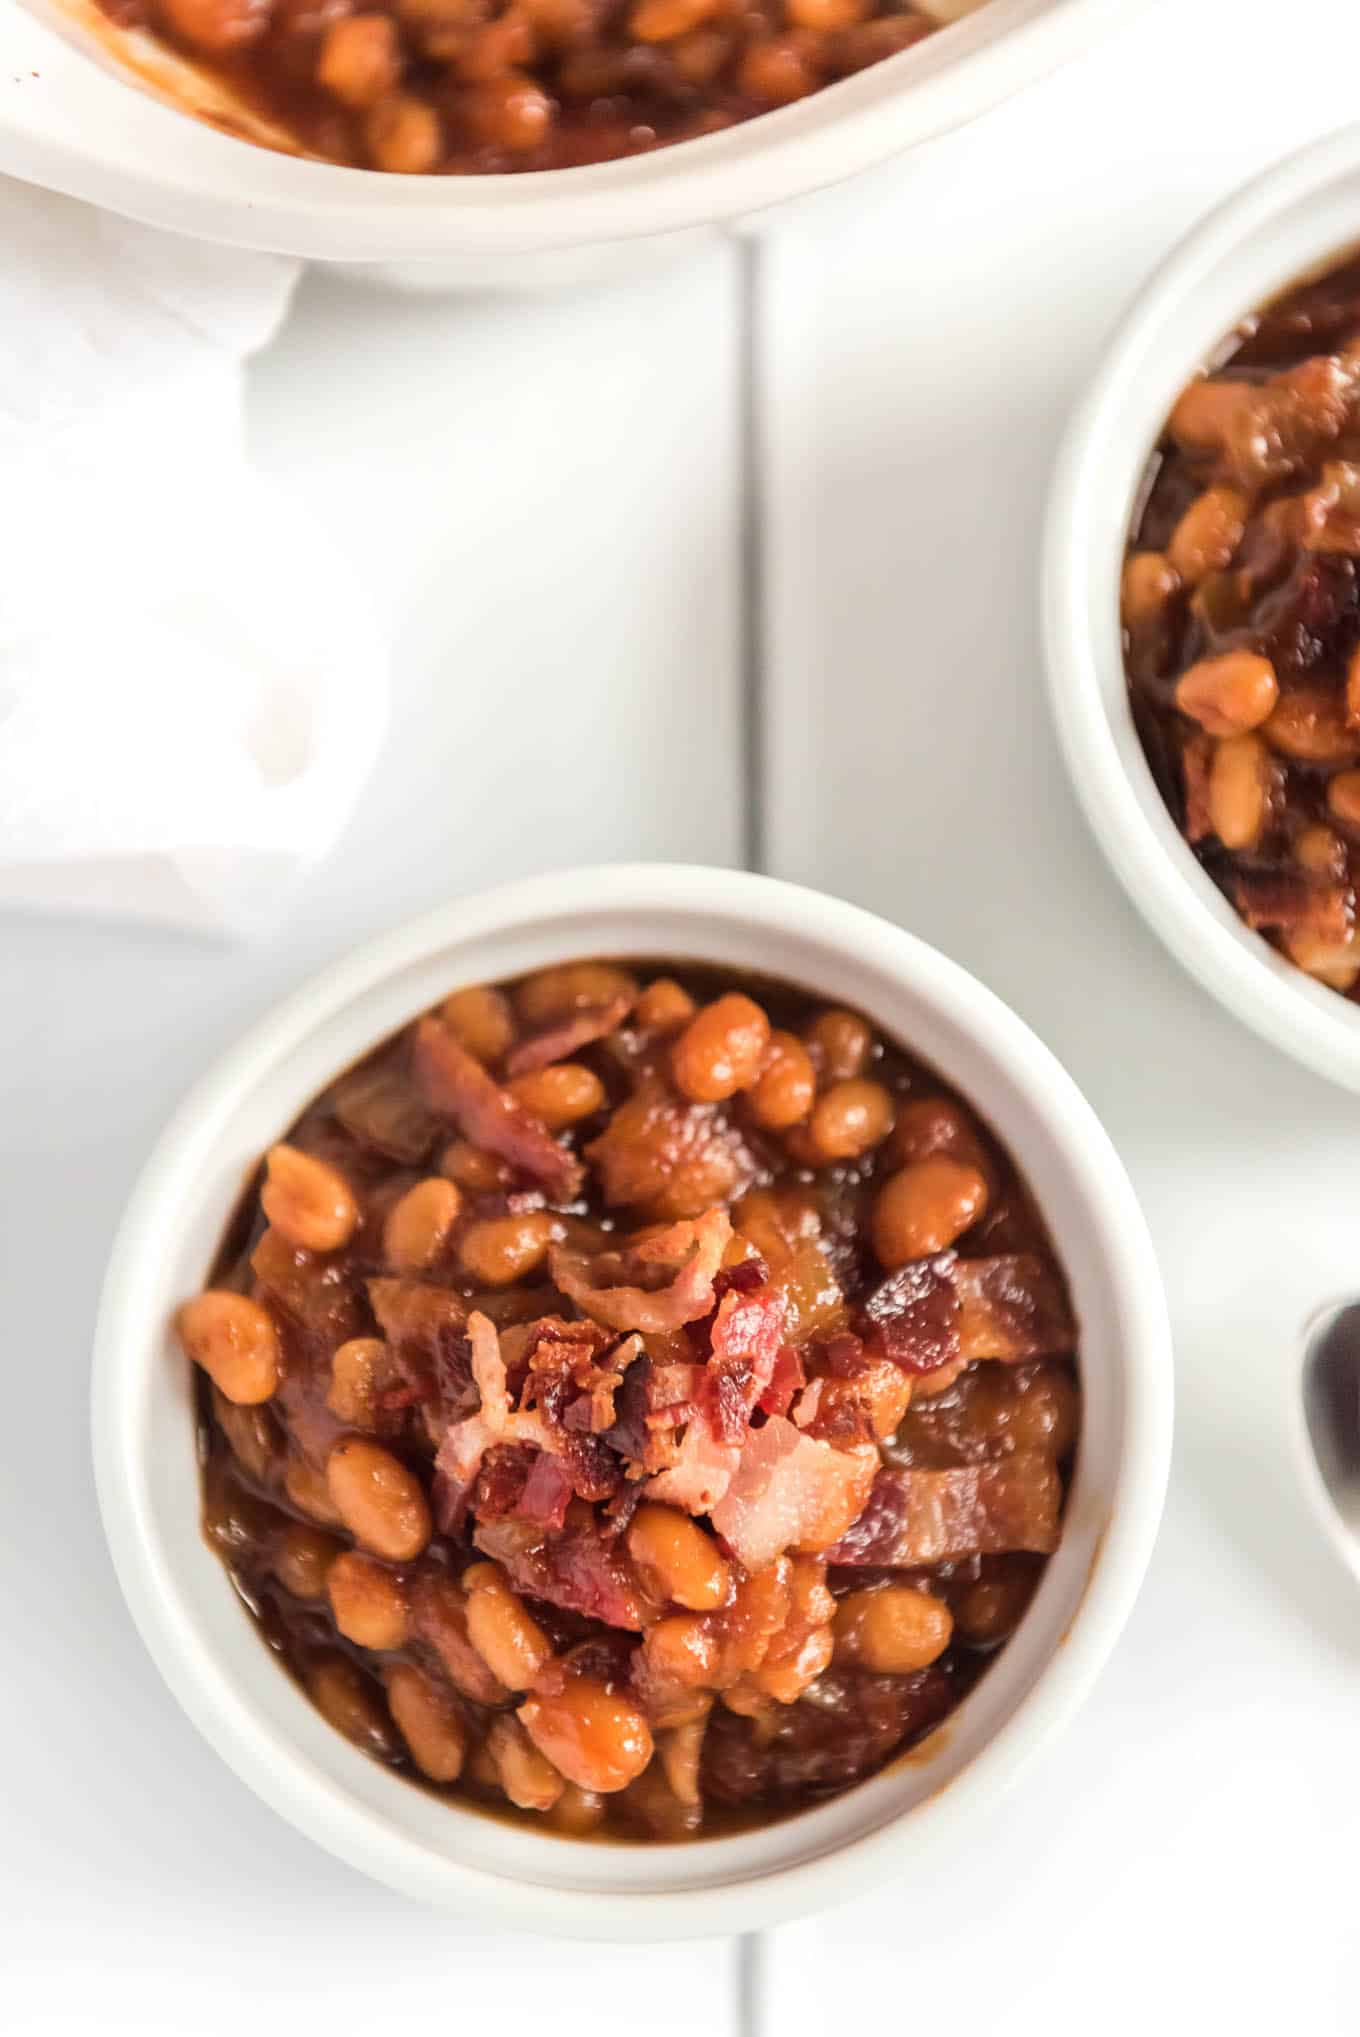 Small ramekin of baked beans with bacon on the counter.